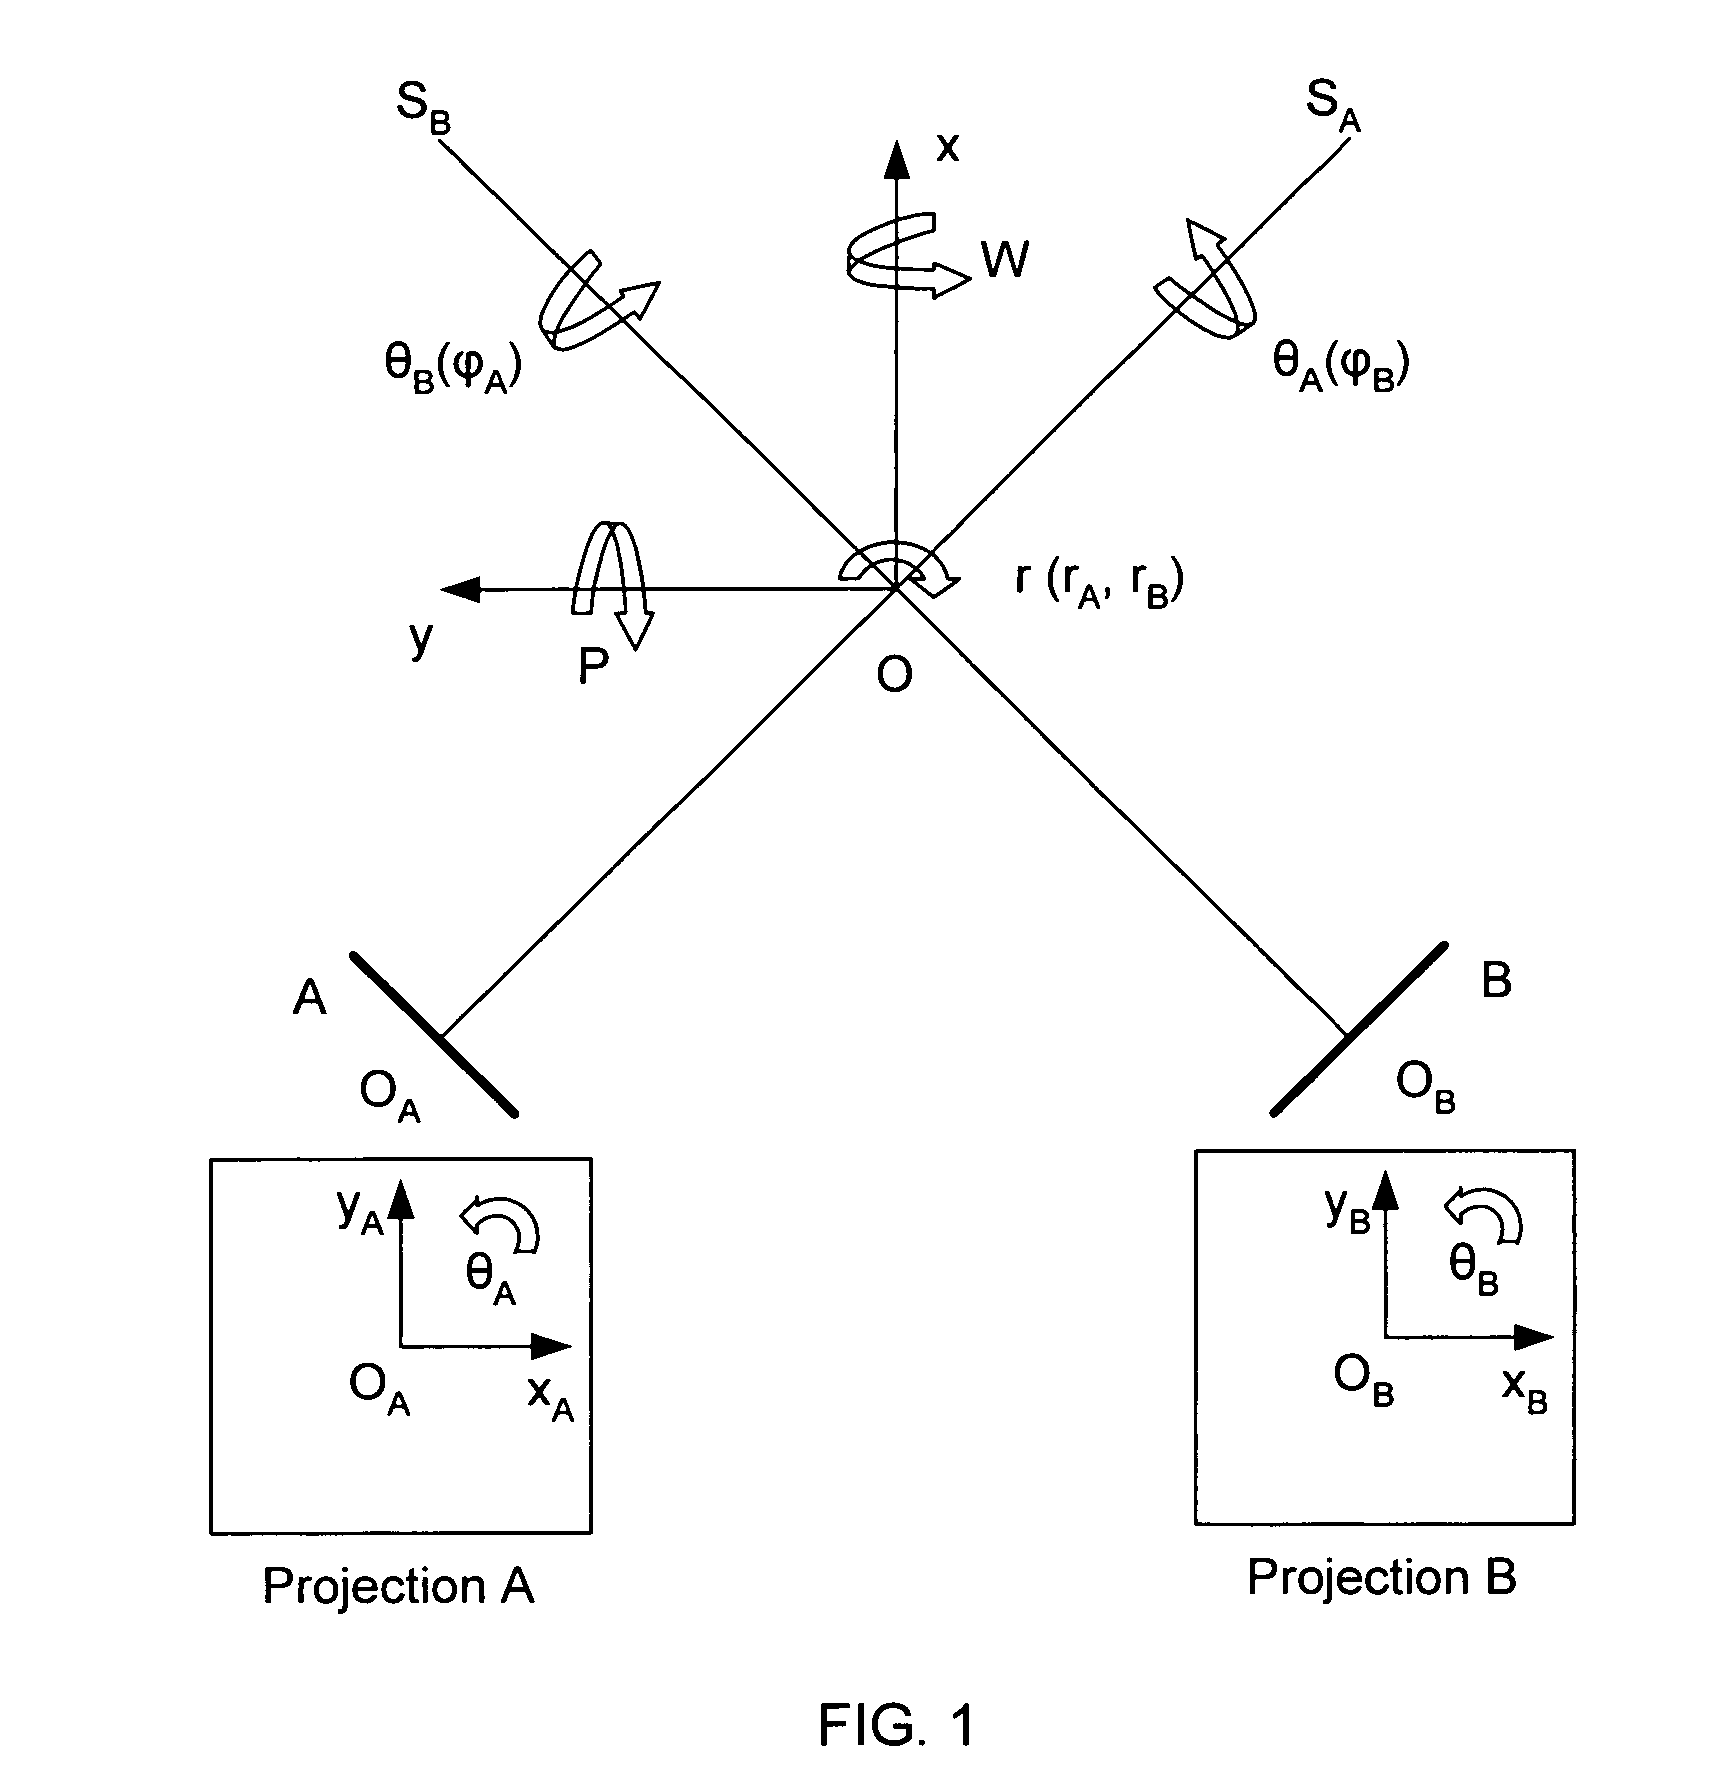 Apparatus and method for registering 2D radiographic images with images reconstructed from 3D scan data